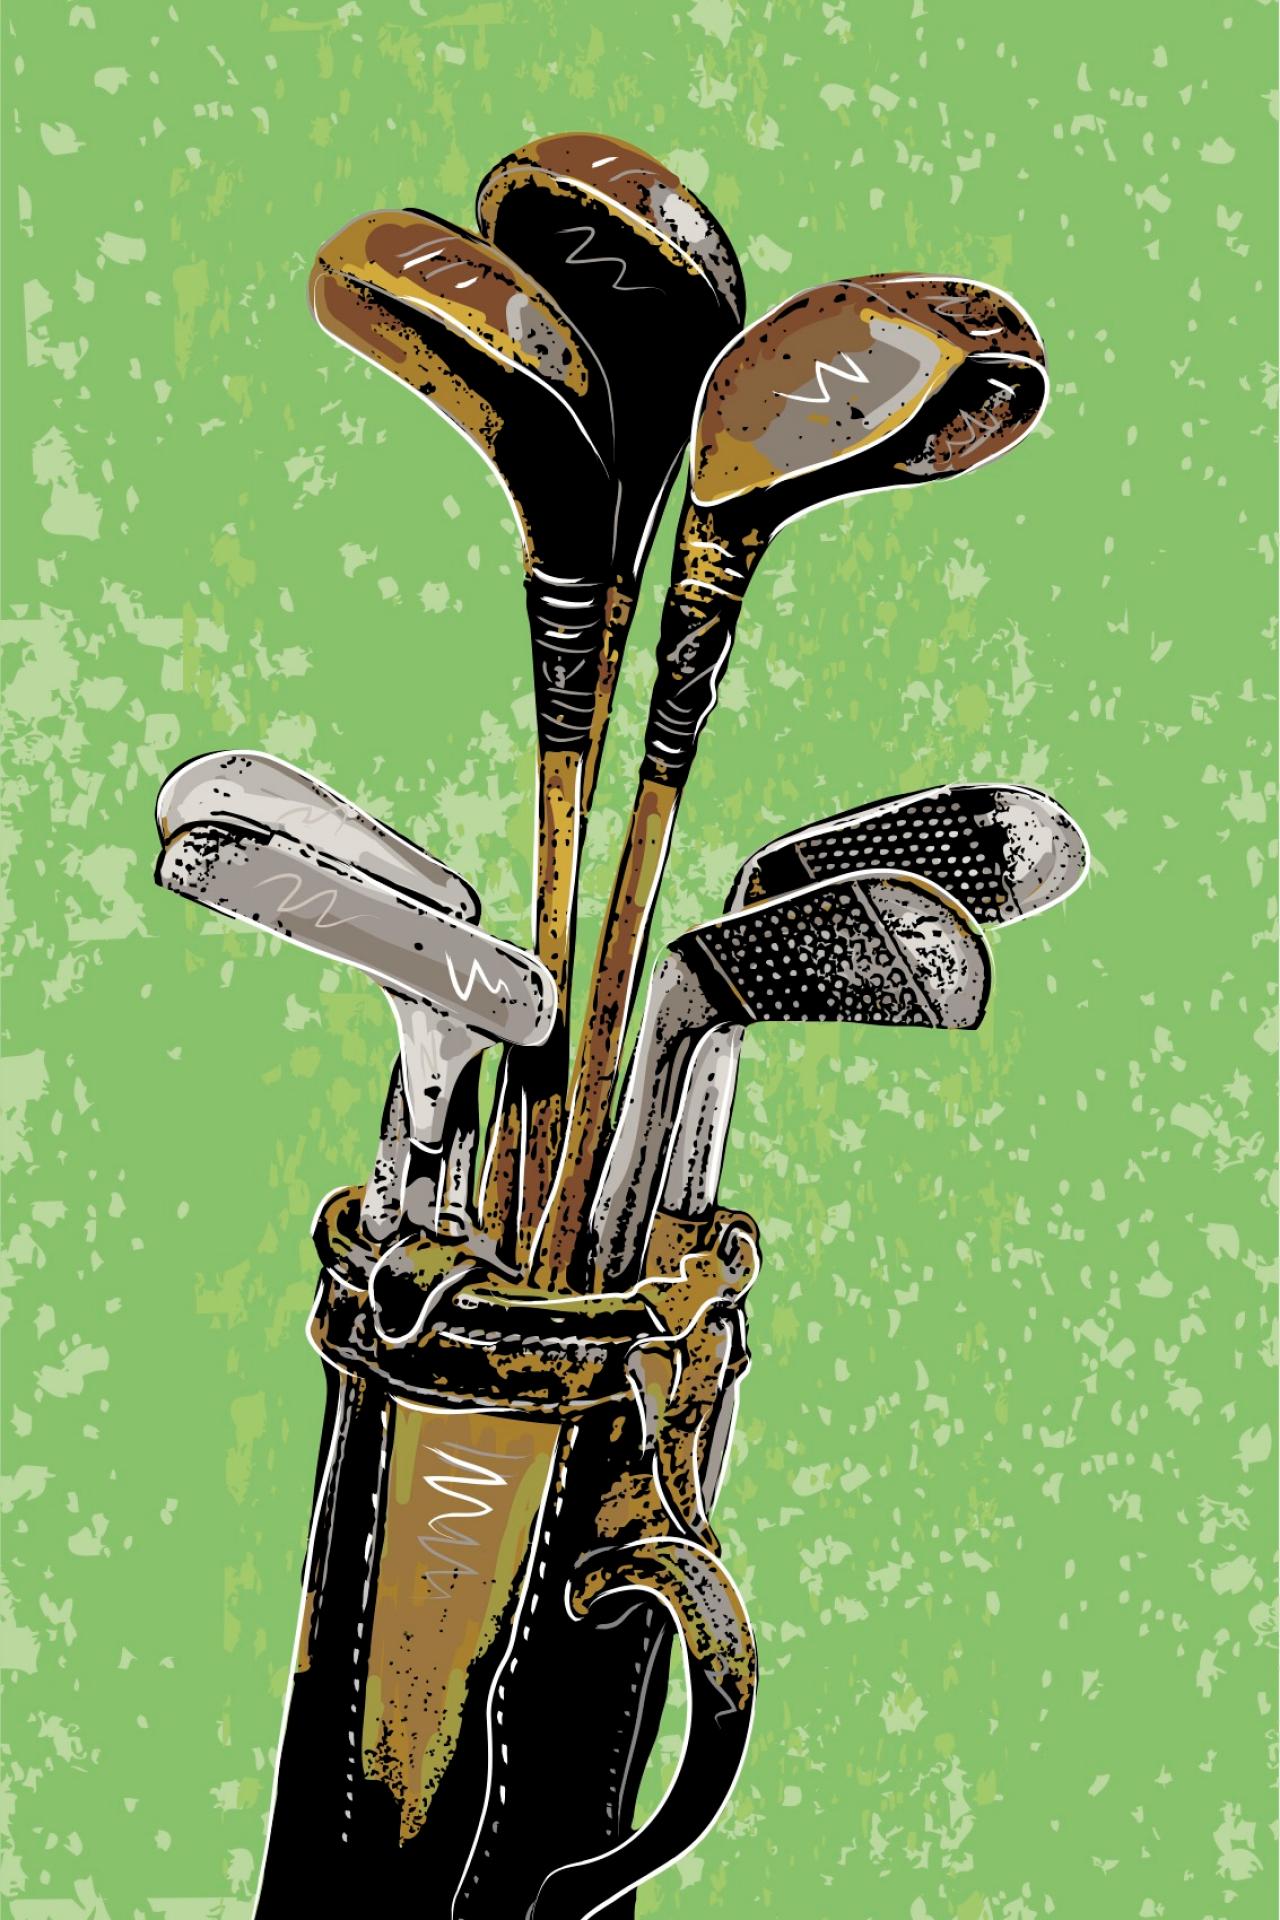 Are hoodies acceptable golf attire? Golf Digest editors weigh in, Golf  Equipment: Clubs, Balls, Bags